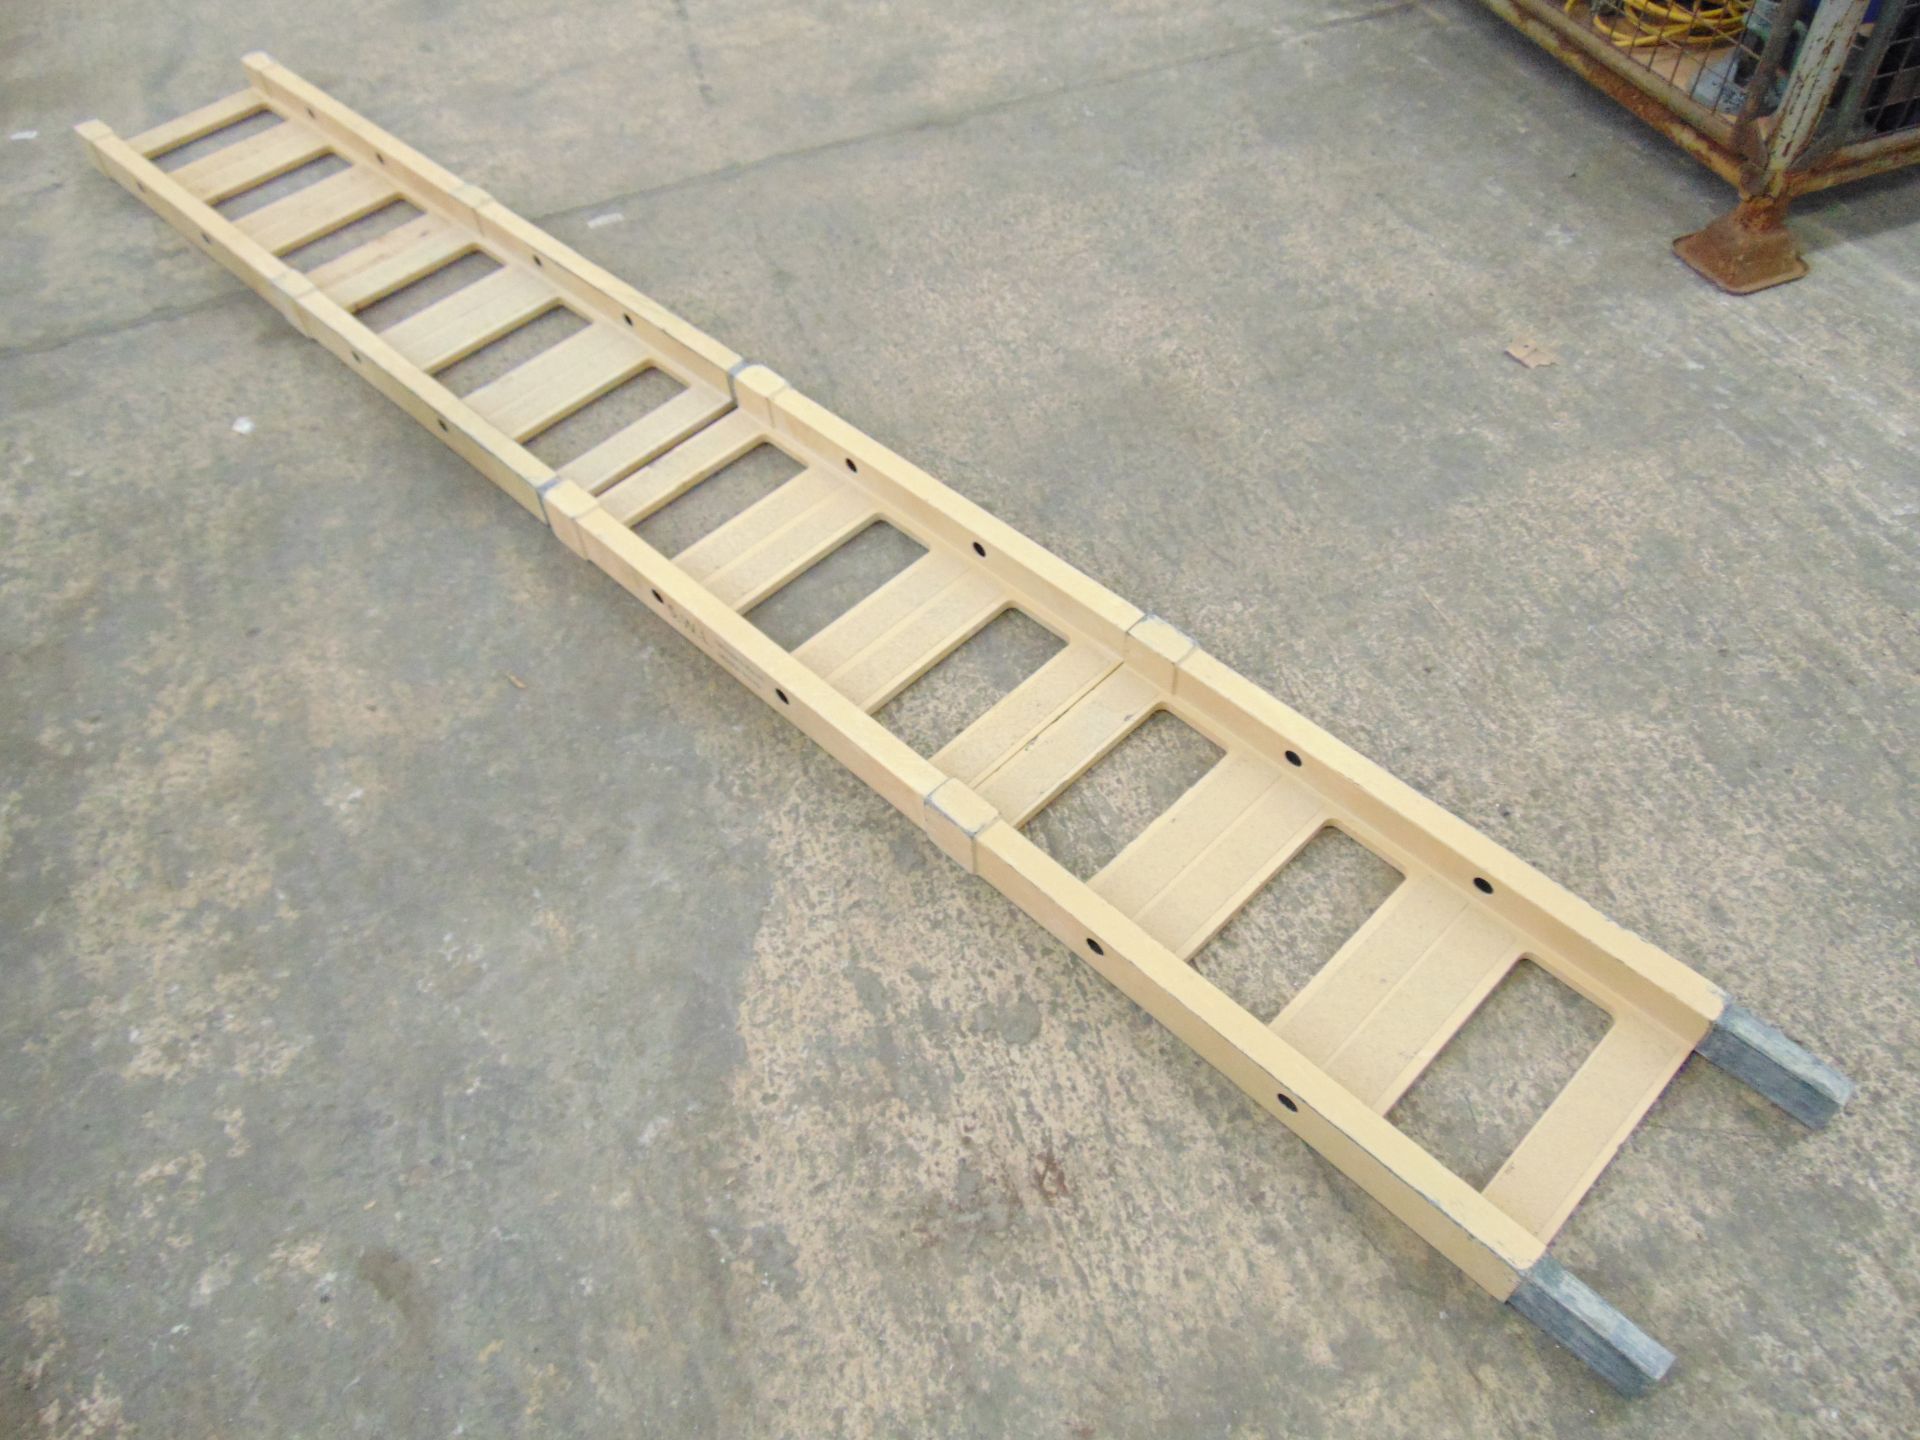 Afghan Issue 4 Section 3m Fibreglass Crossing Ladder